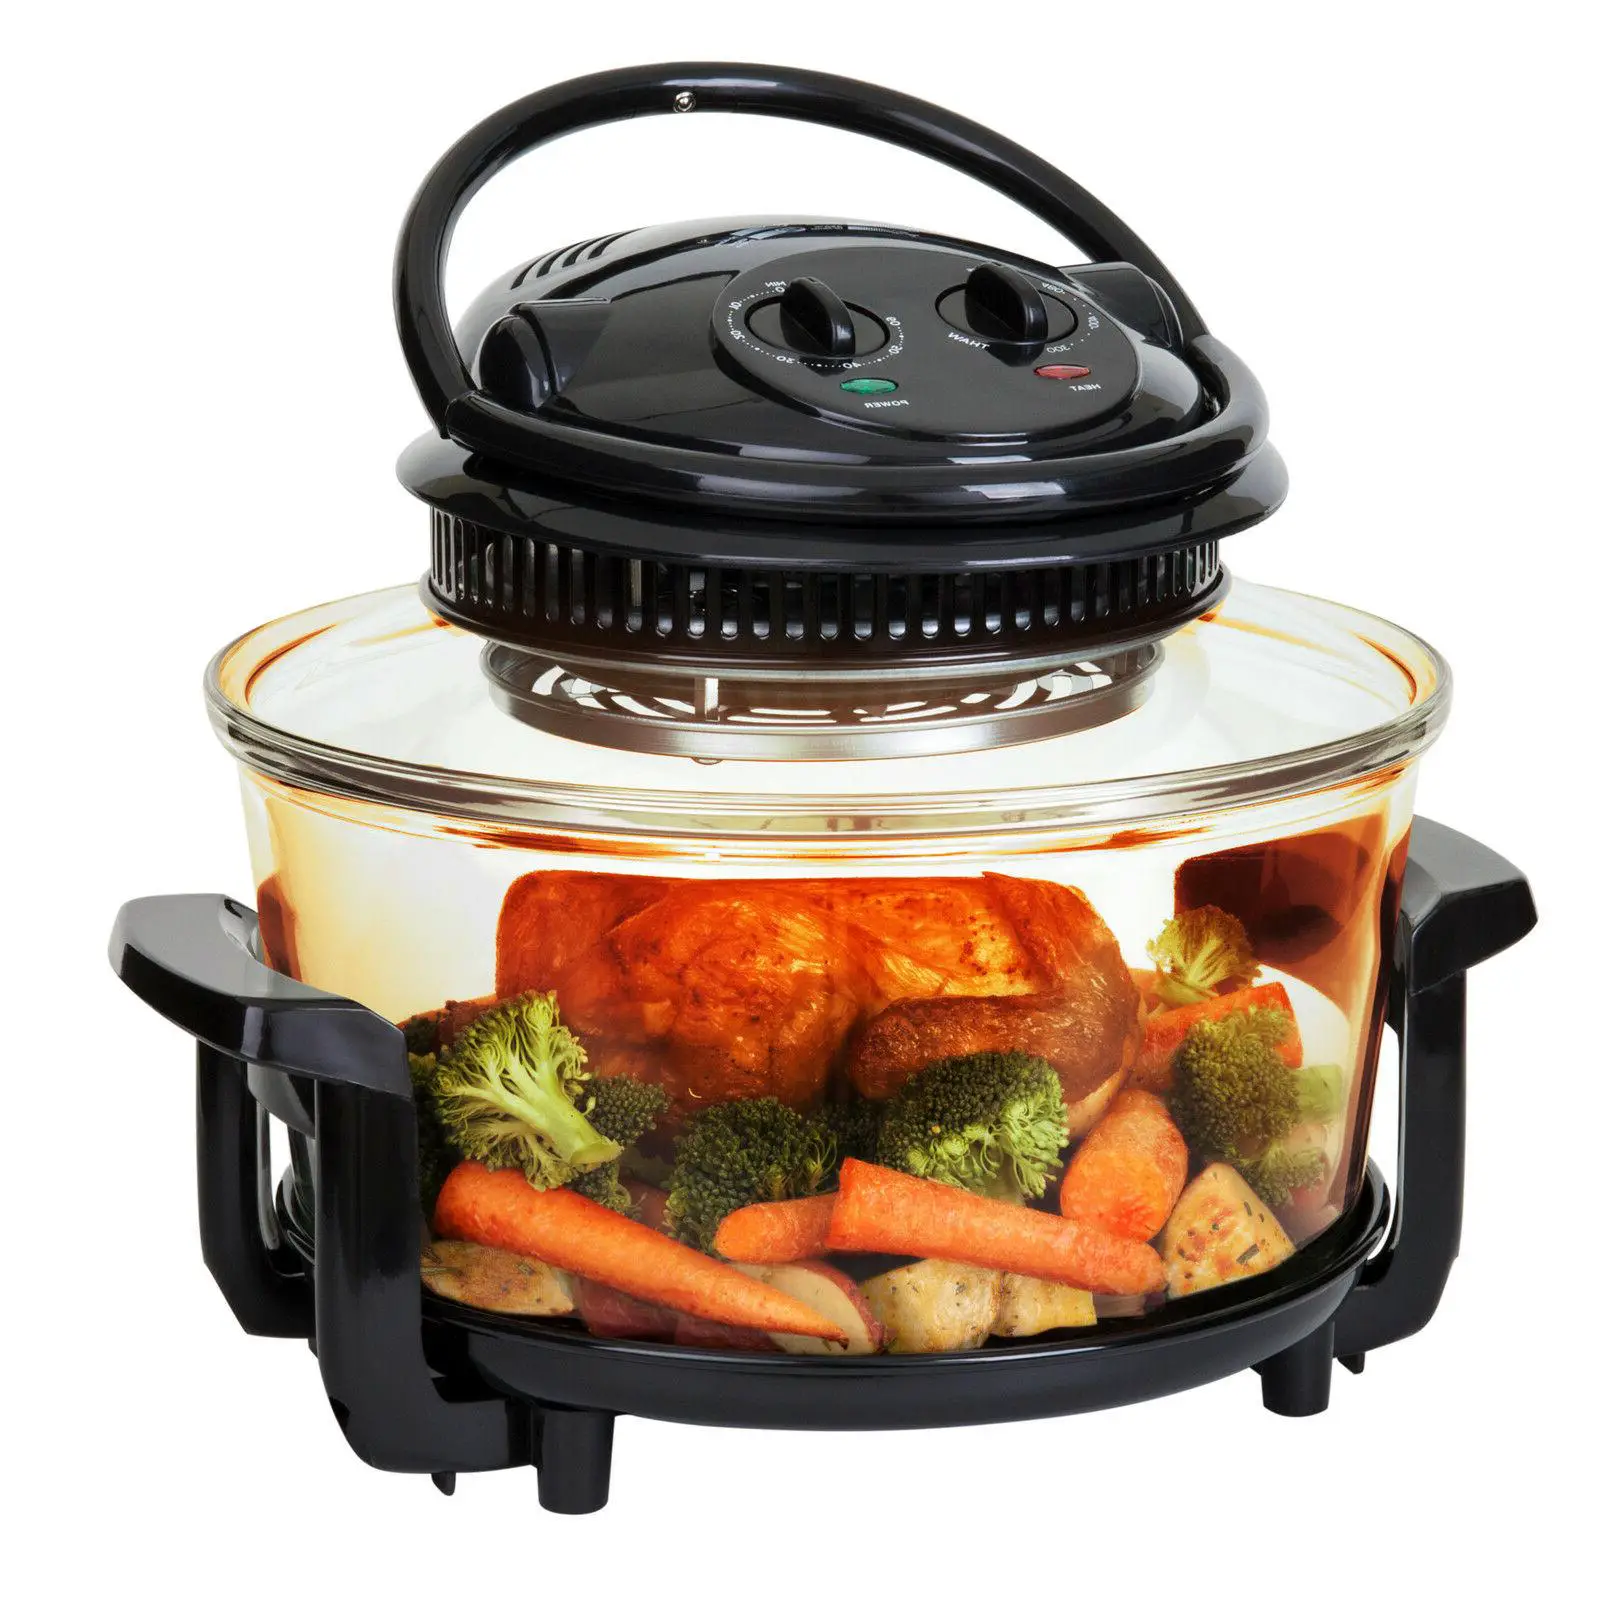 Convention Oven Air Fryer Best Rated Prime Large